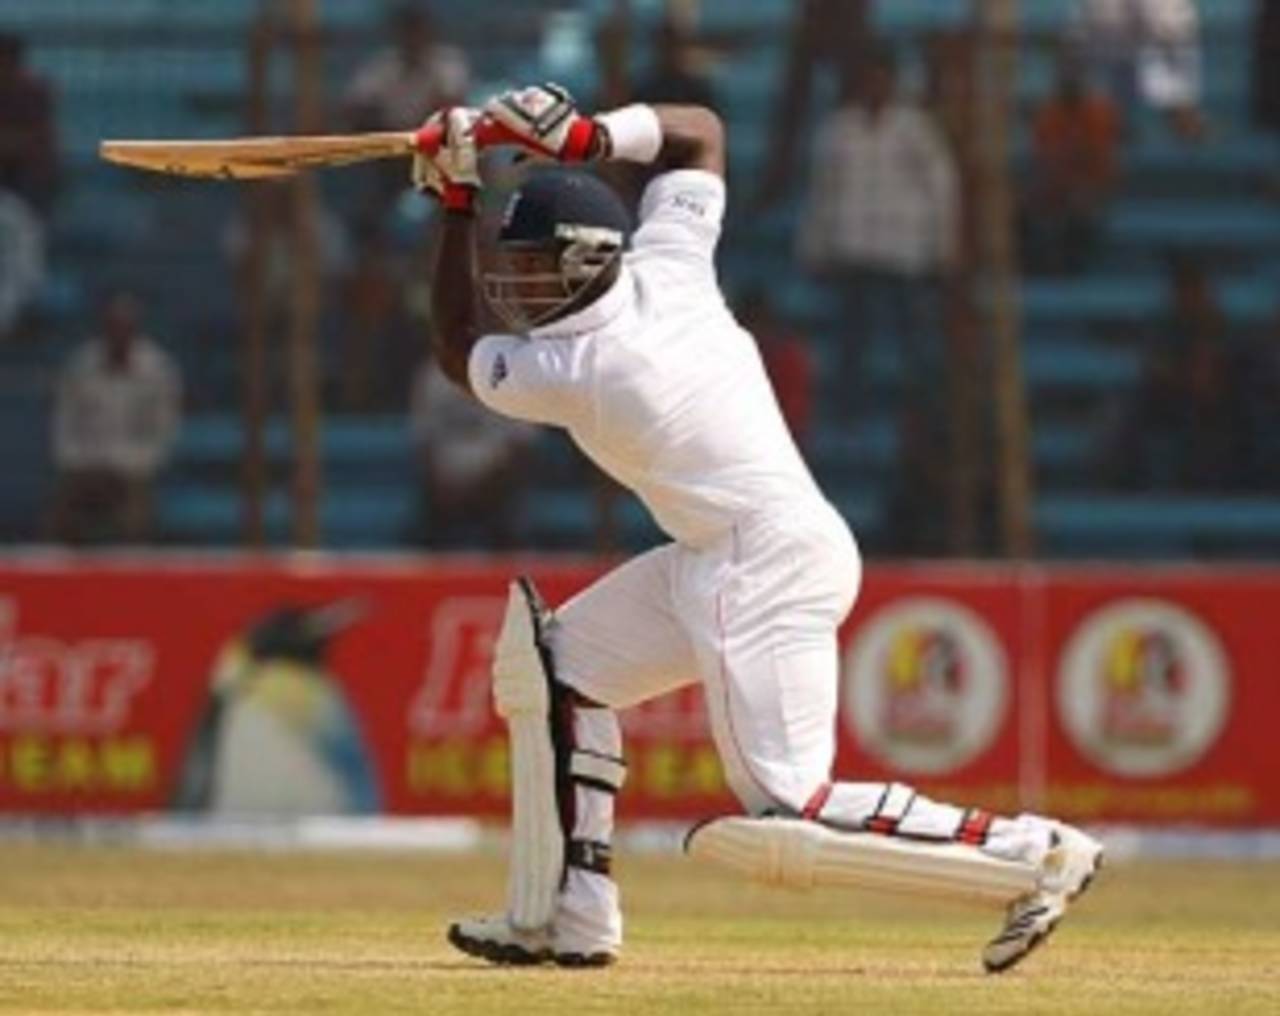 Michael Carberry played some confident shots in his 30, Bangladesh v England, 1st Test, Chittagong, March 12, 2010